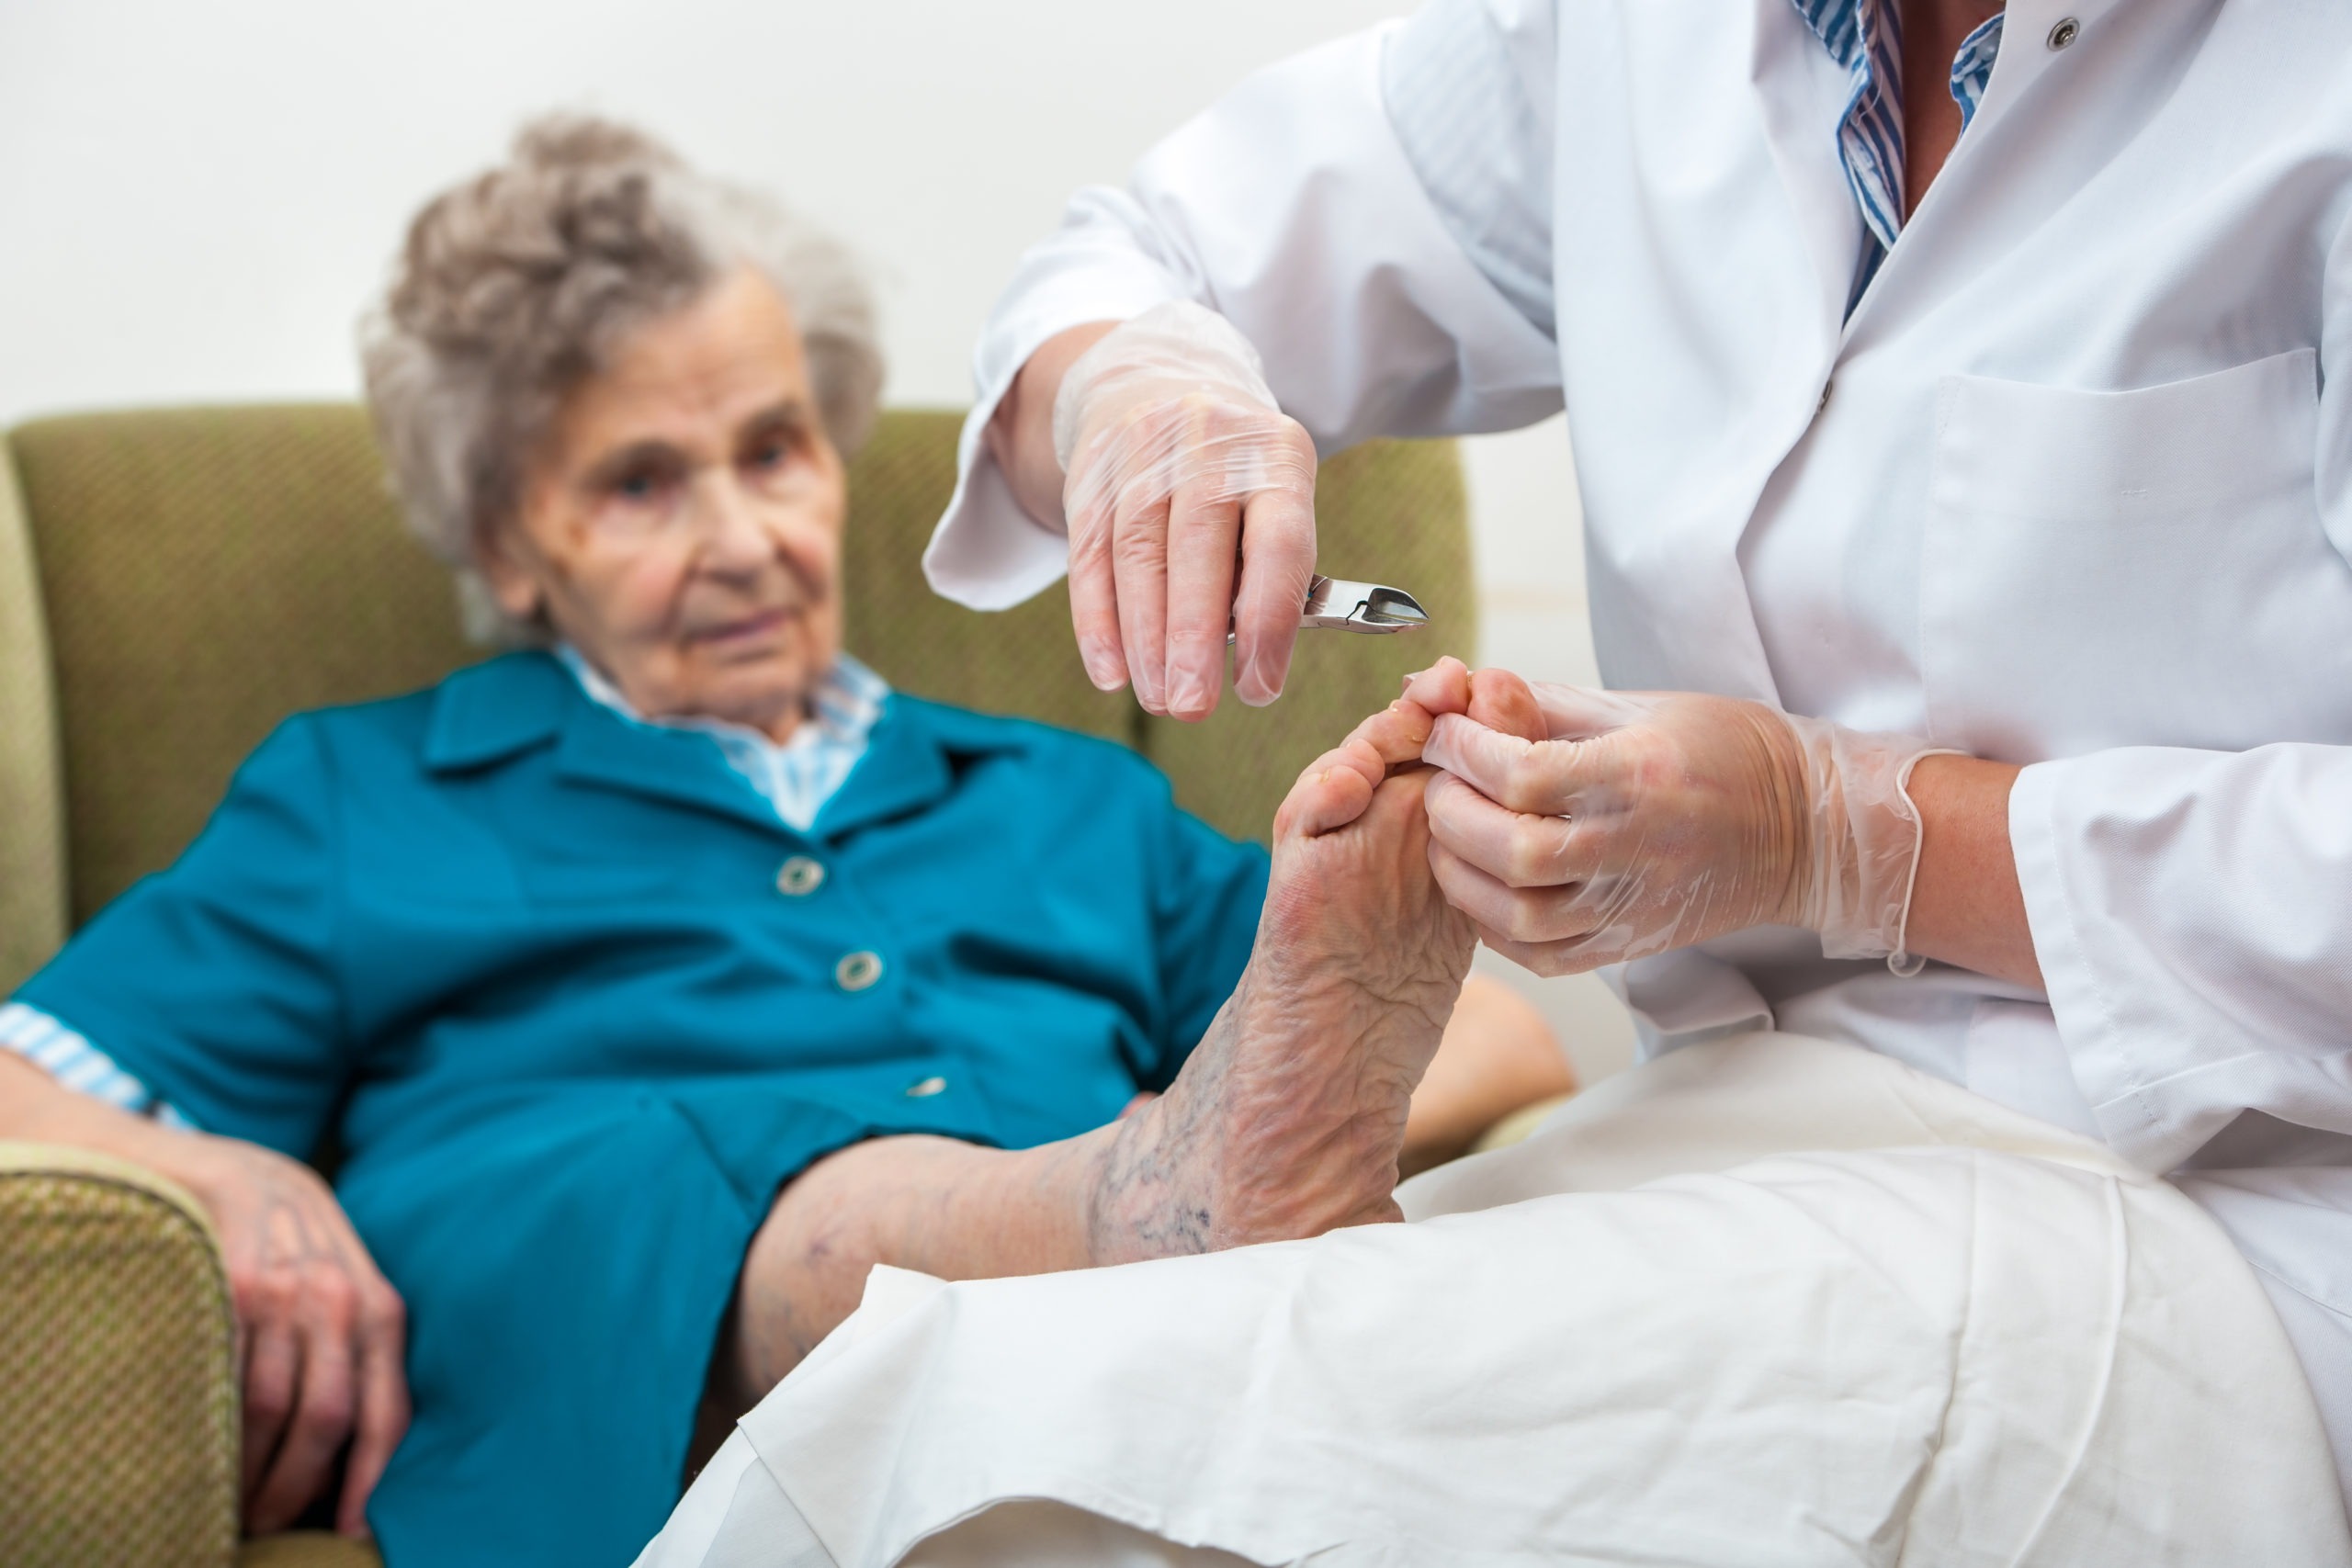 Nurse assists an elderly woman with chiropody and body care at home